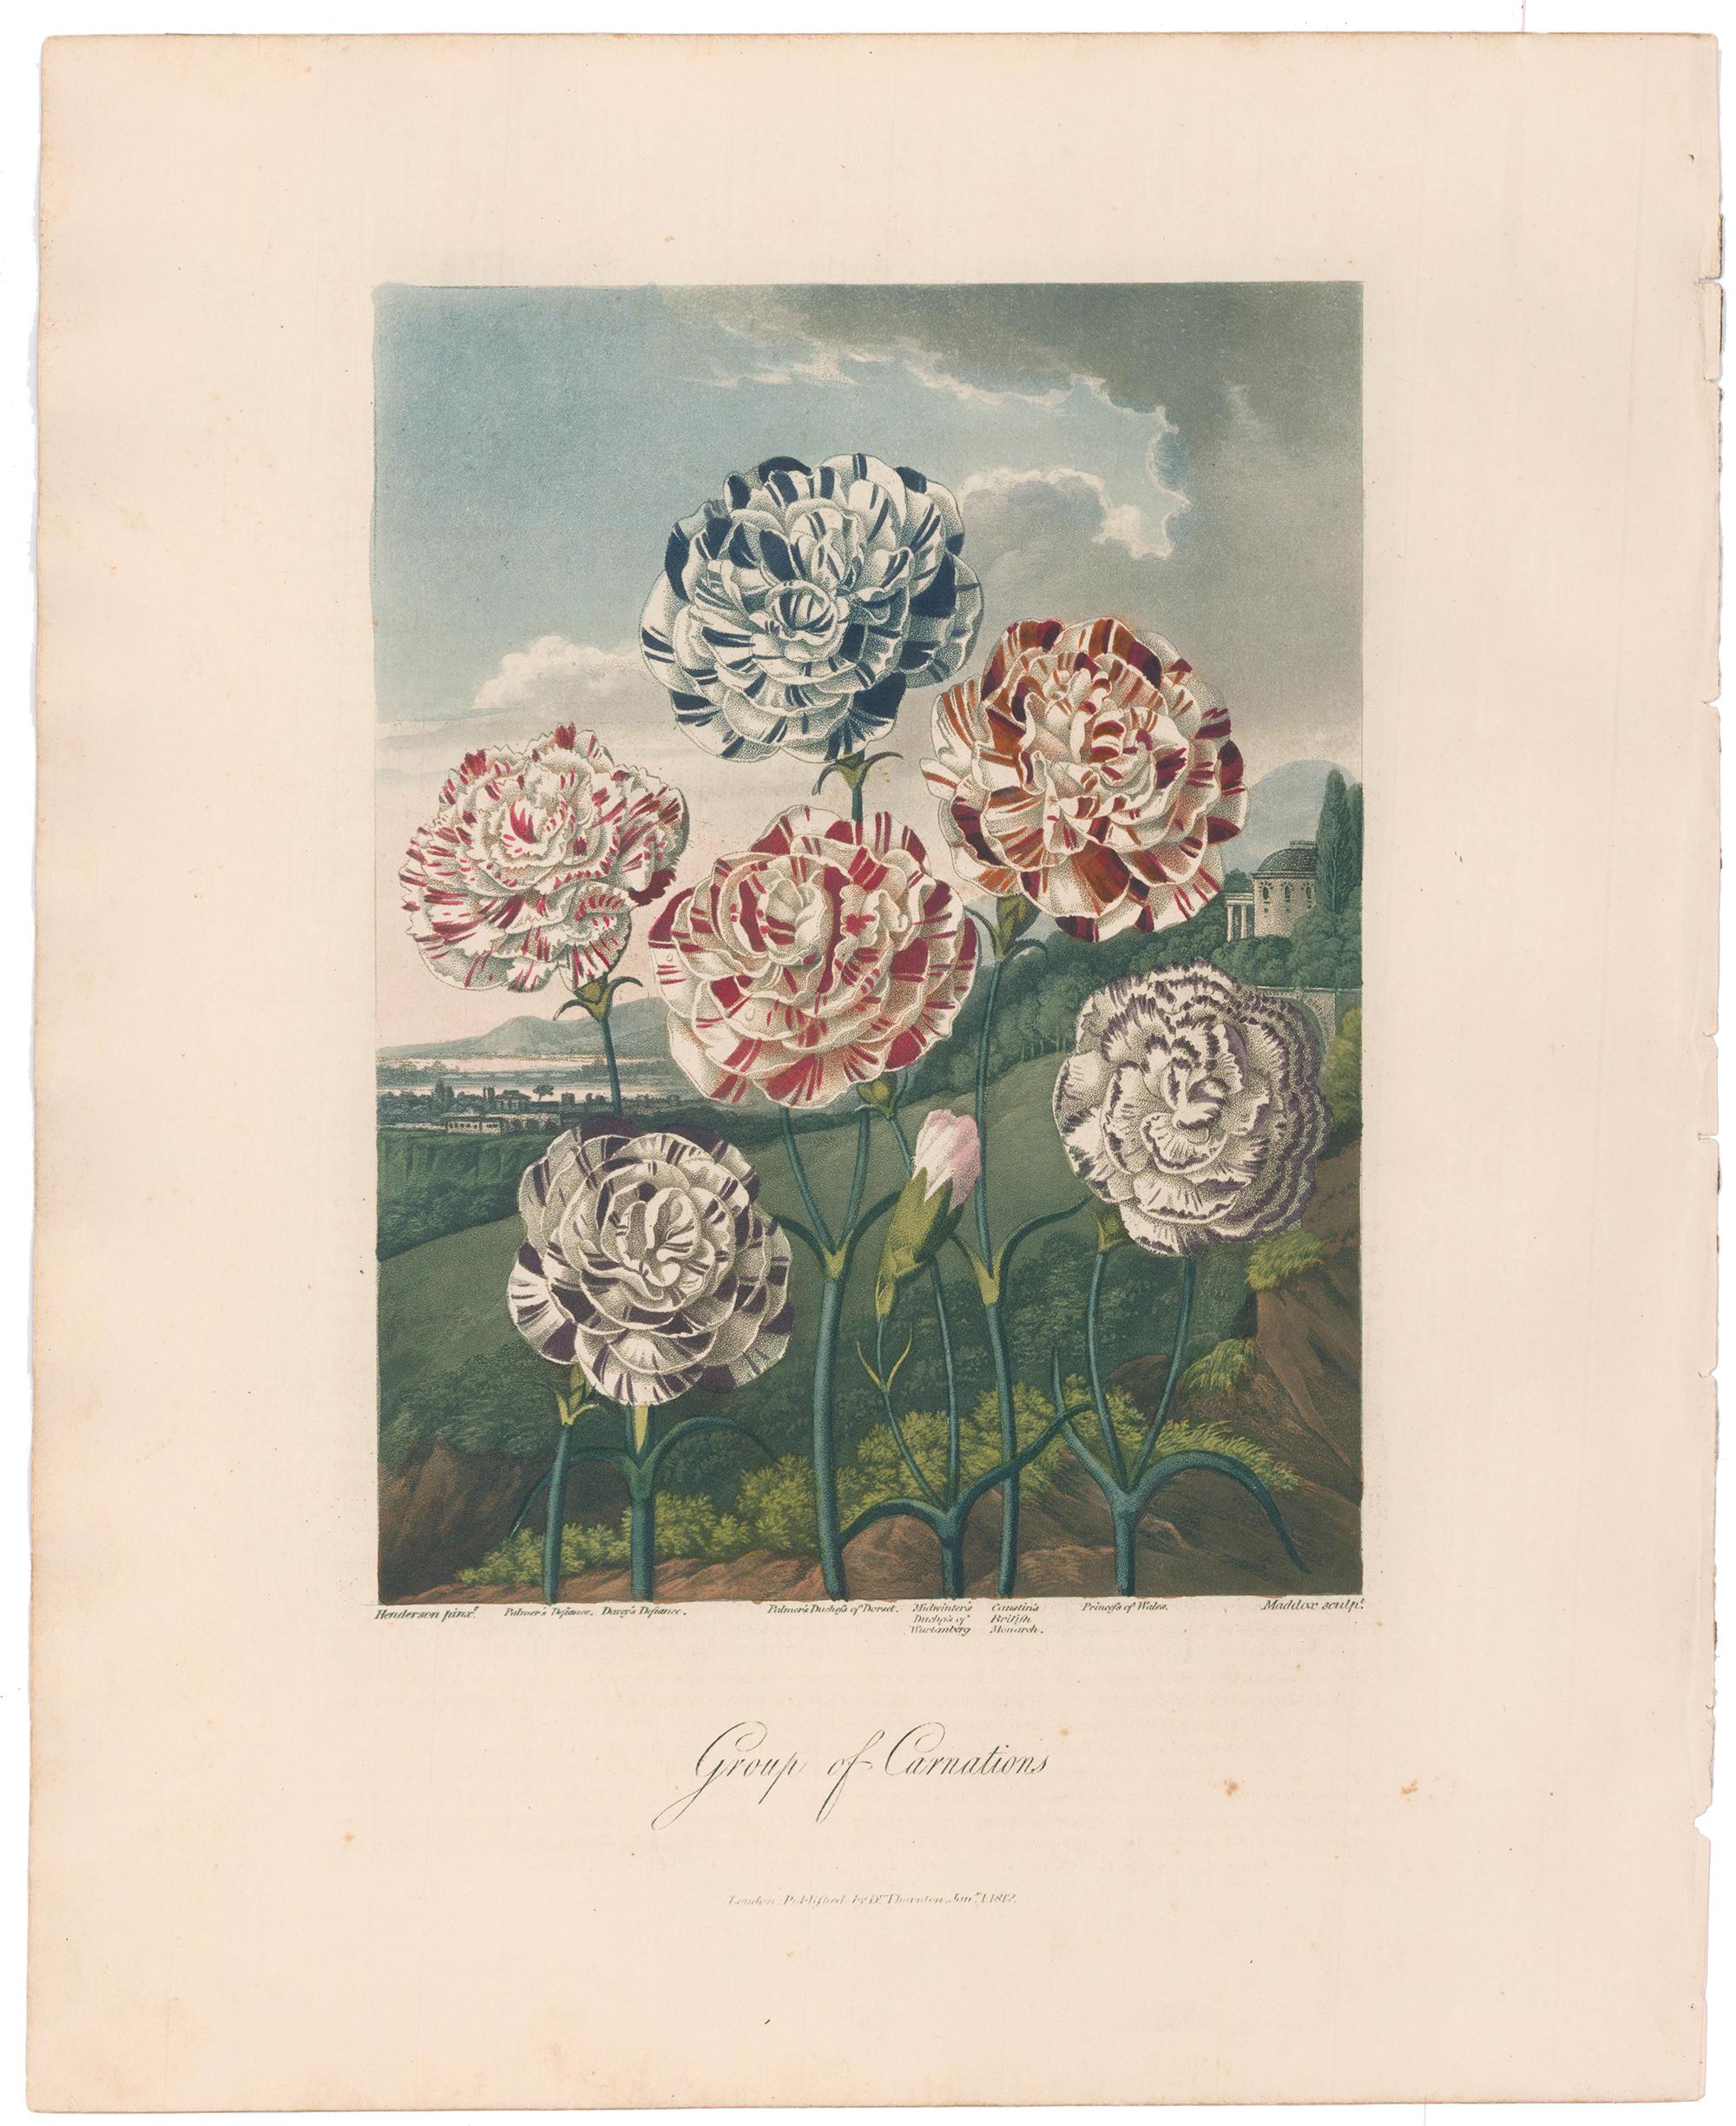 Group of Carnations from Temple of Flora - Print by Dr. Robert John Thornton